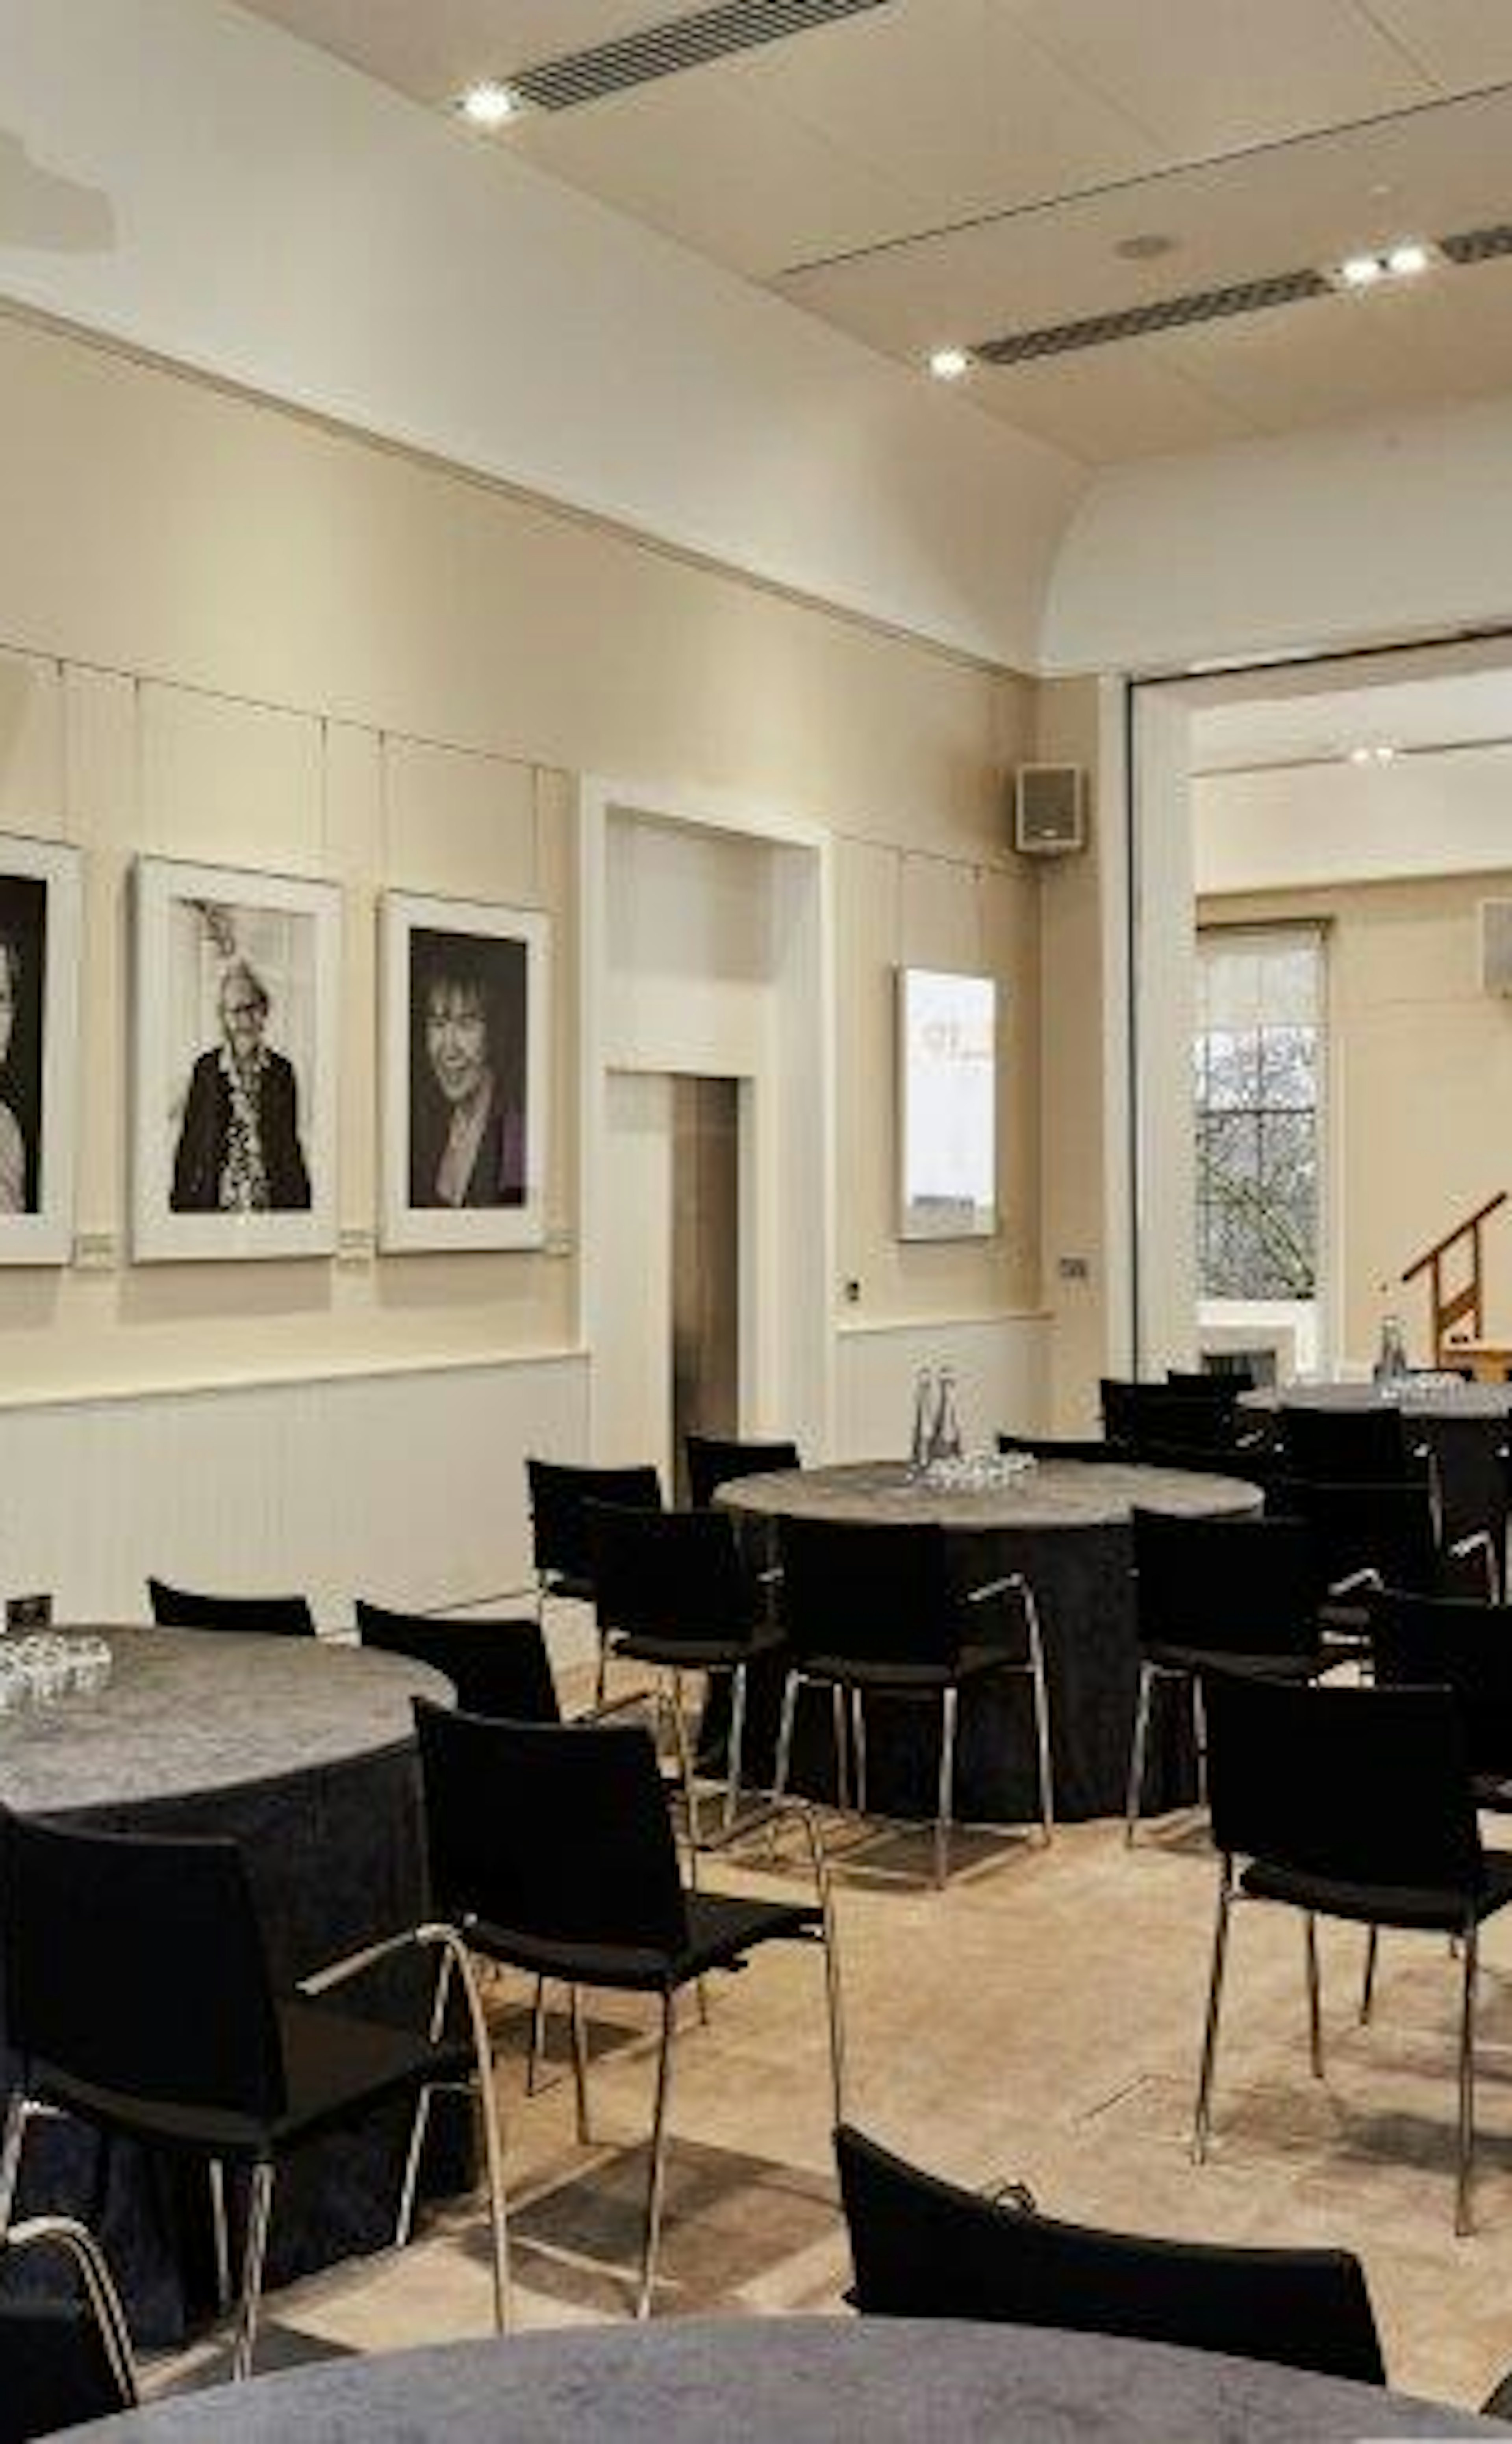 Conference Venues - Prince Philip House